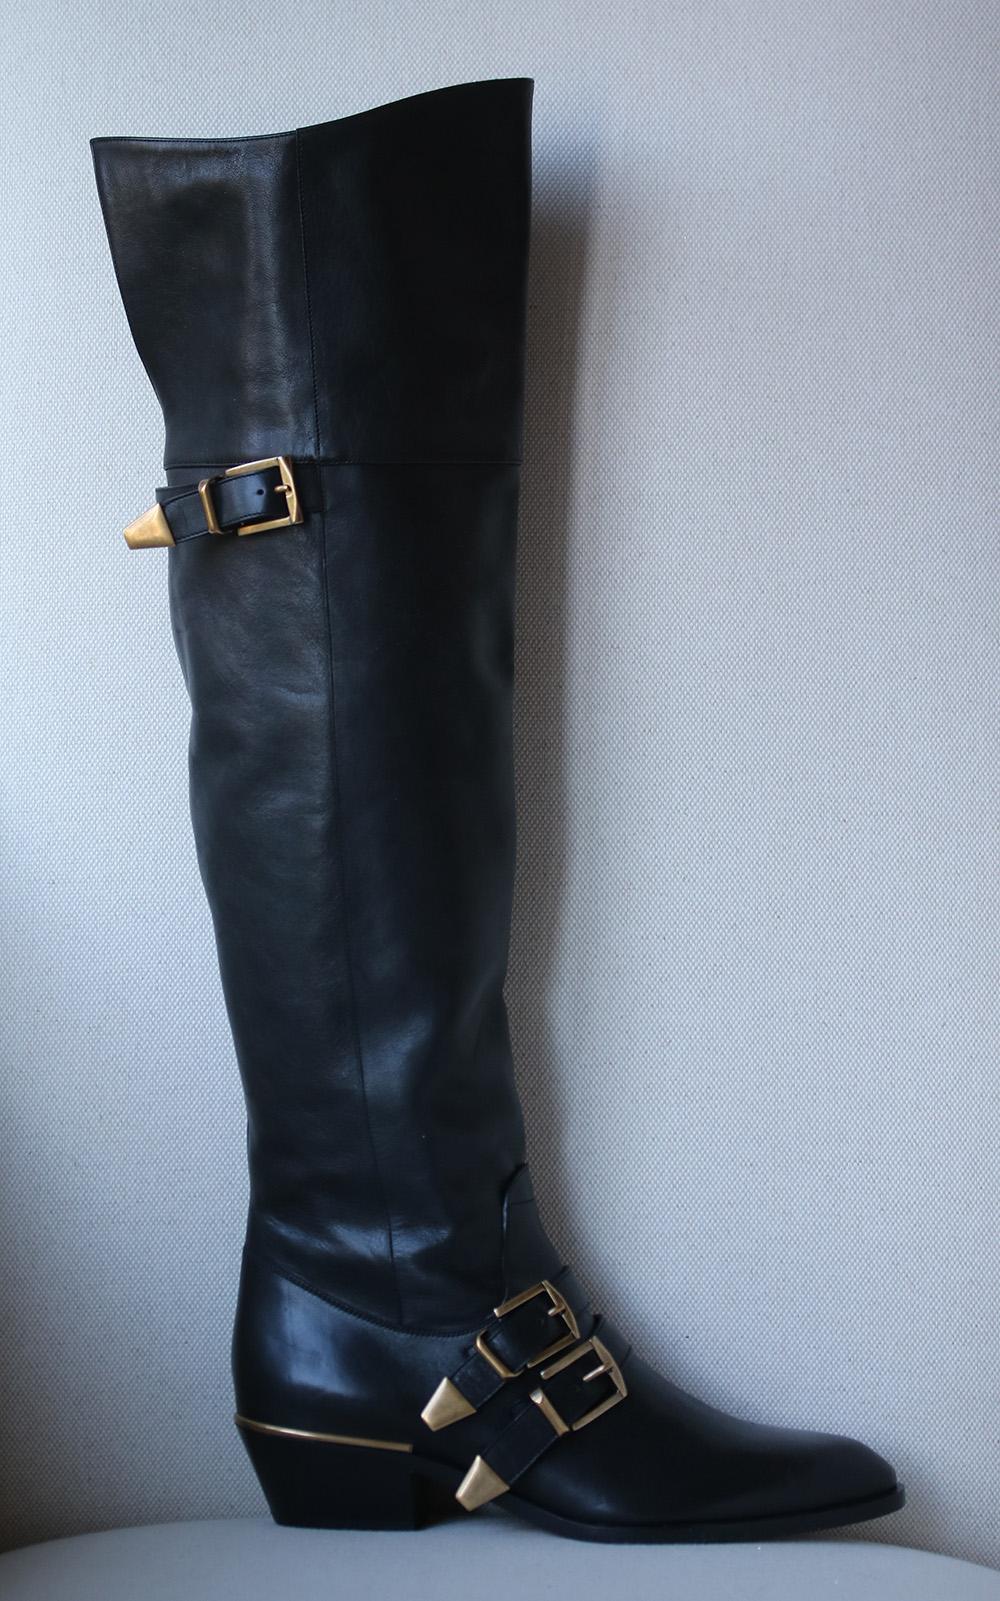 Chloé's collection conveyed a 1970s mood with minor equestrian references, as embodied by these black leather thigh-high boots. The pointed-toe, square-heeled shoes are both simple and stylish, modestly decorated with a gold-tone buckled straps.